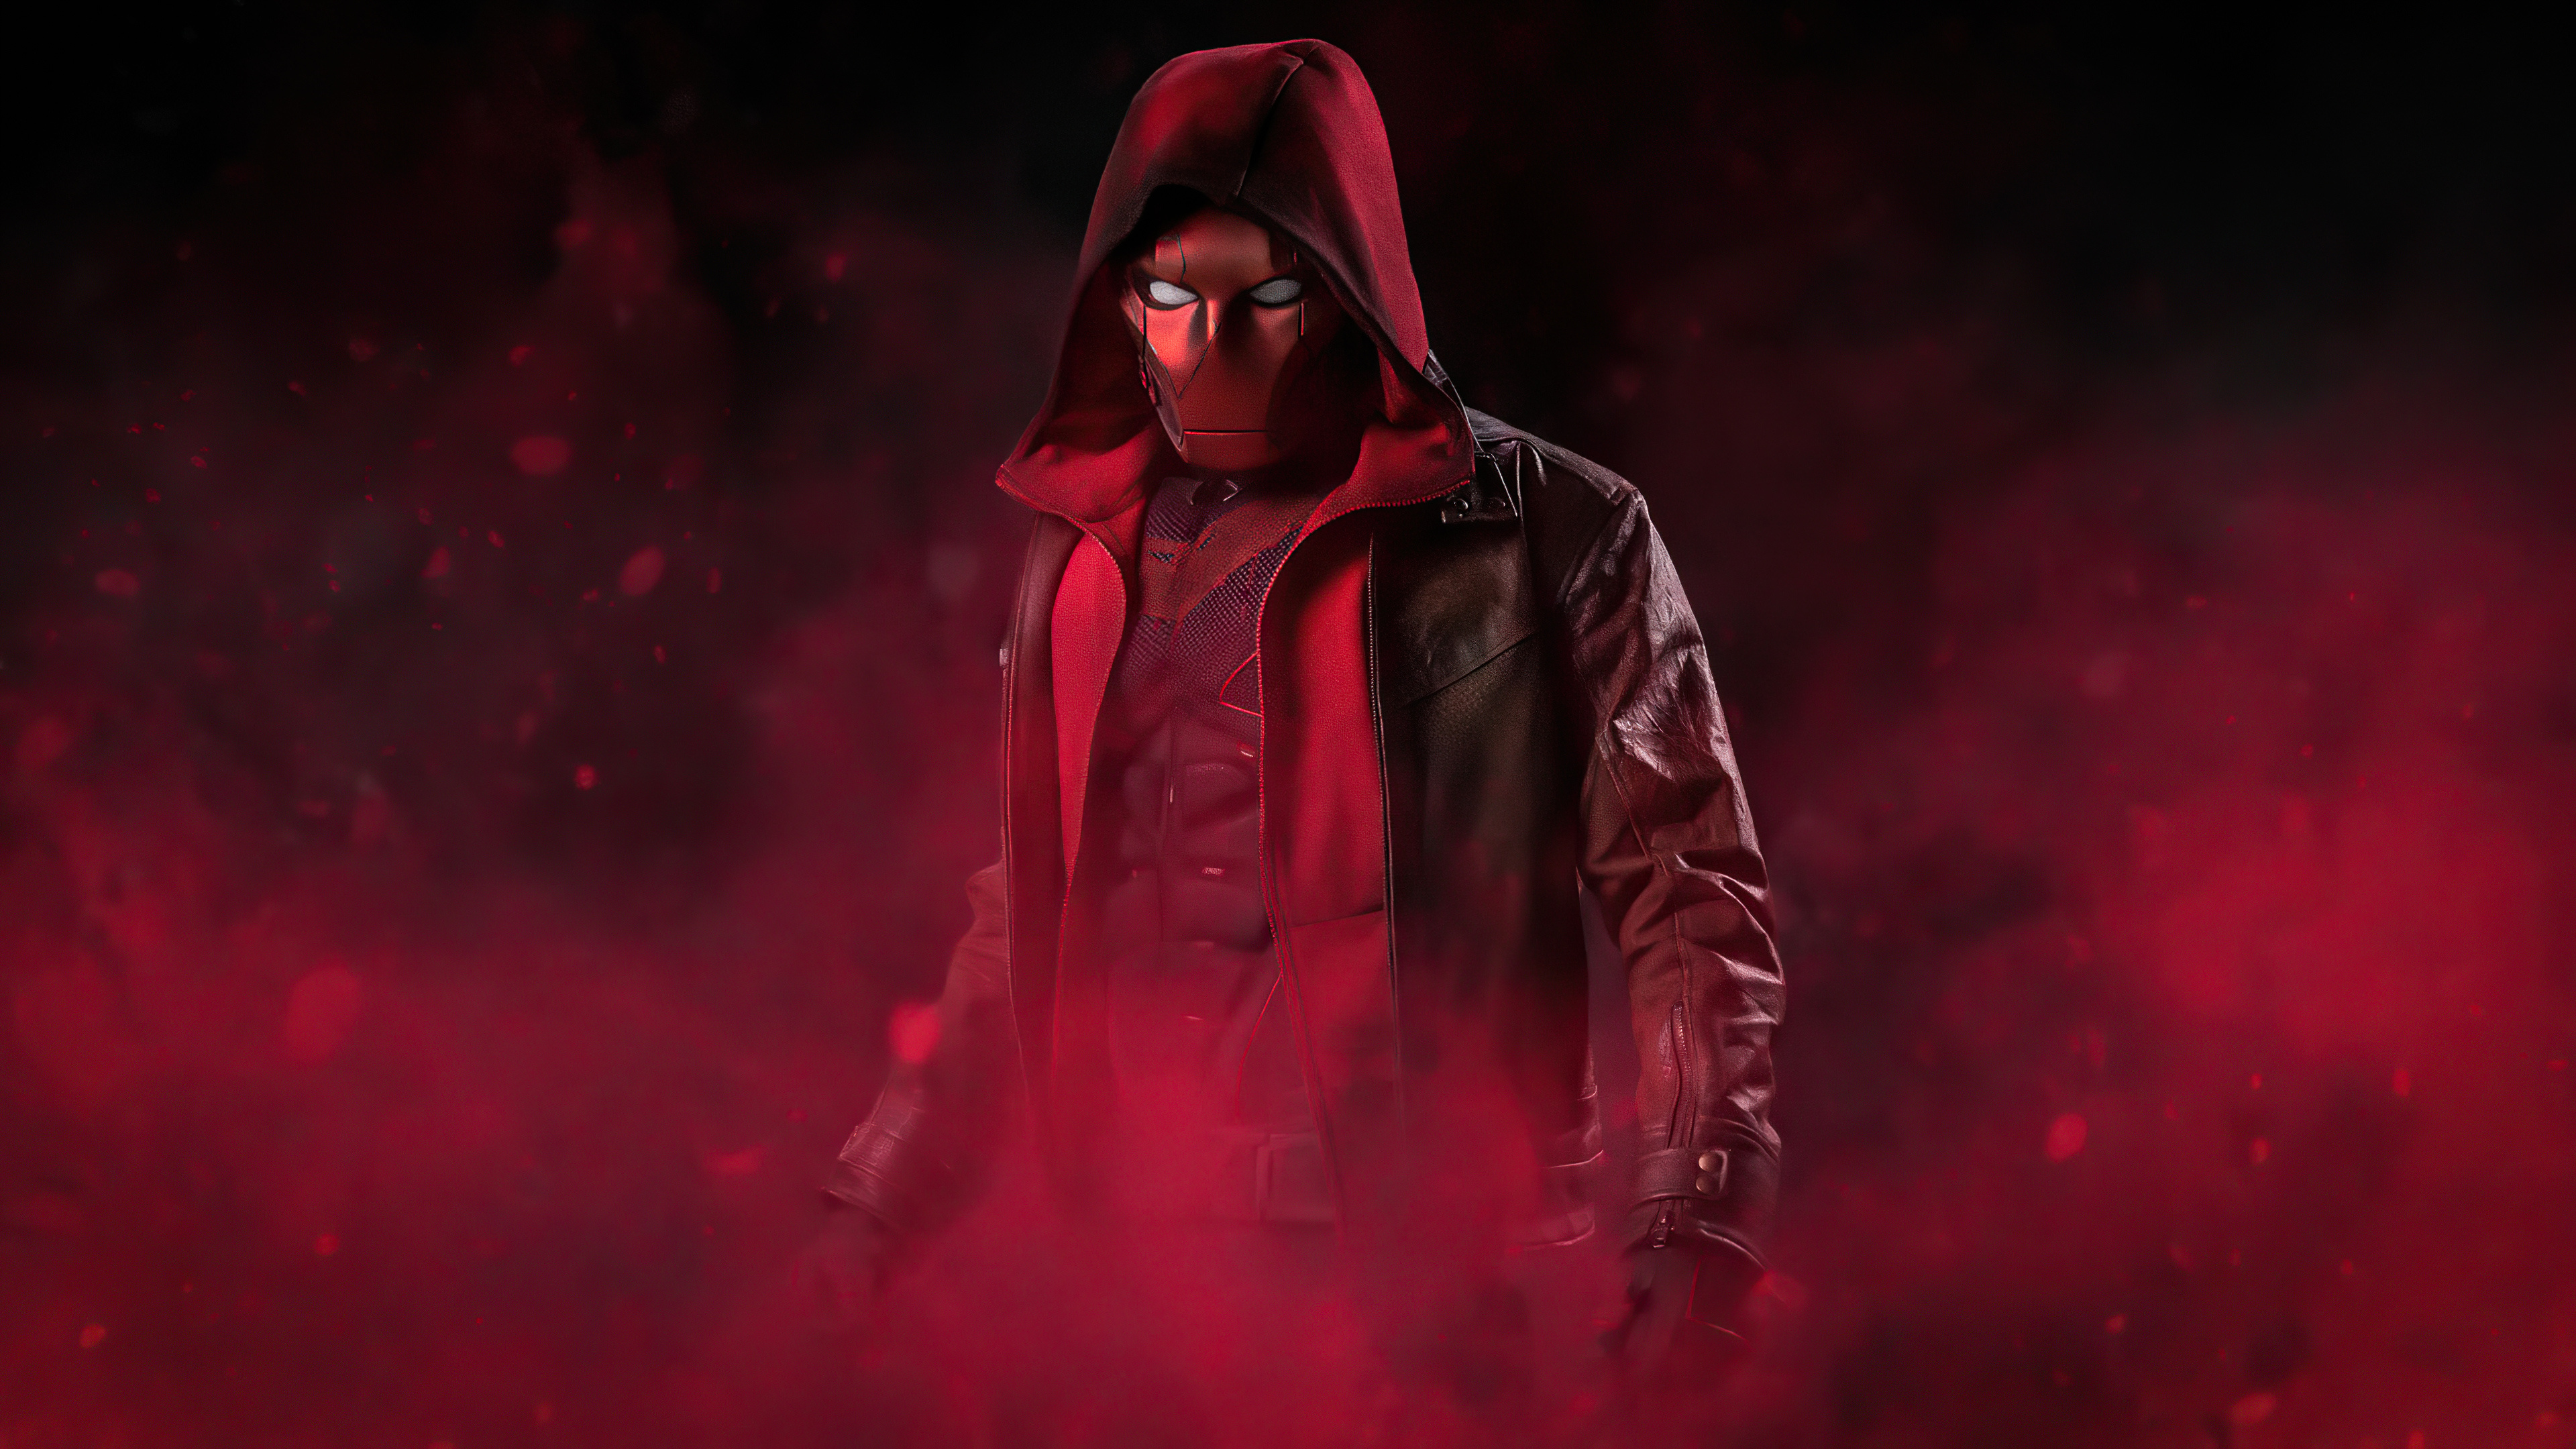 Titans (TV Series), Red Hood character, Action-packed episodes, Exciting visuals, 3840x2160 4K Desktop